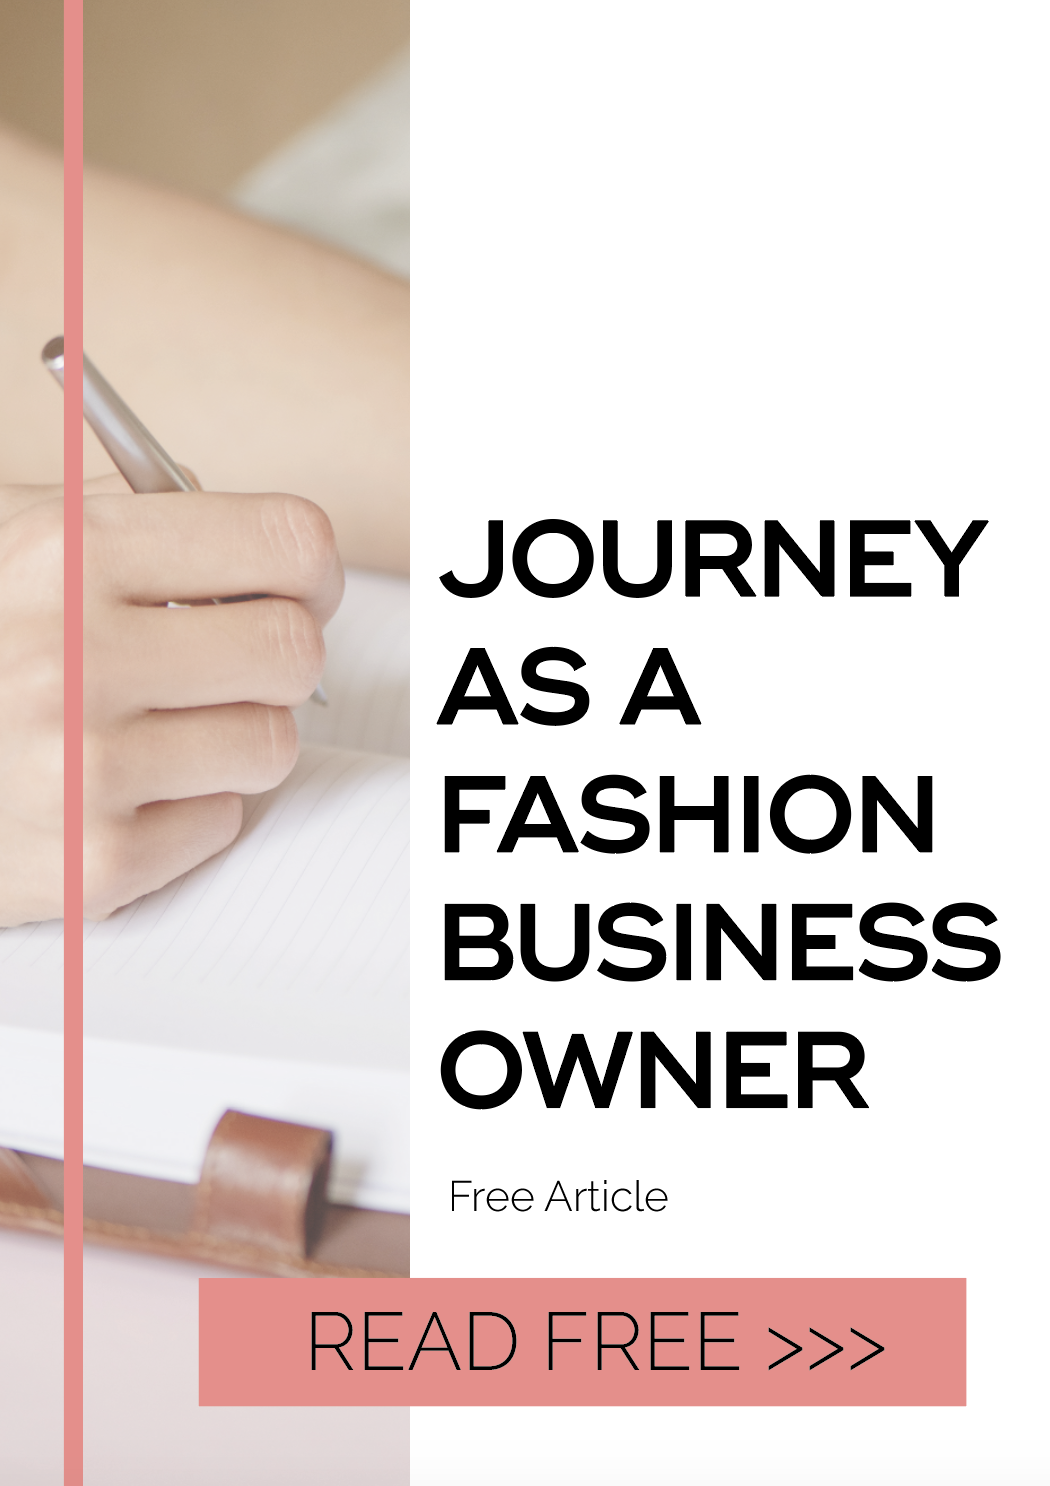 Journey as a fashion business owner 1.png